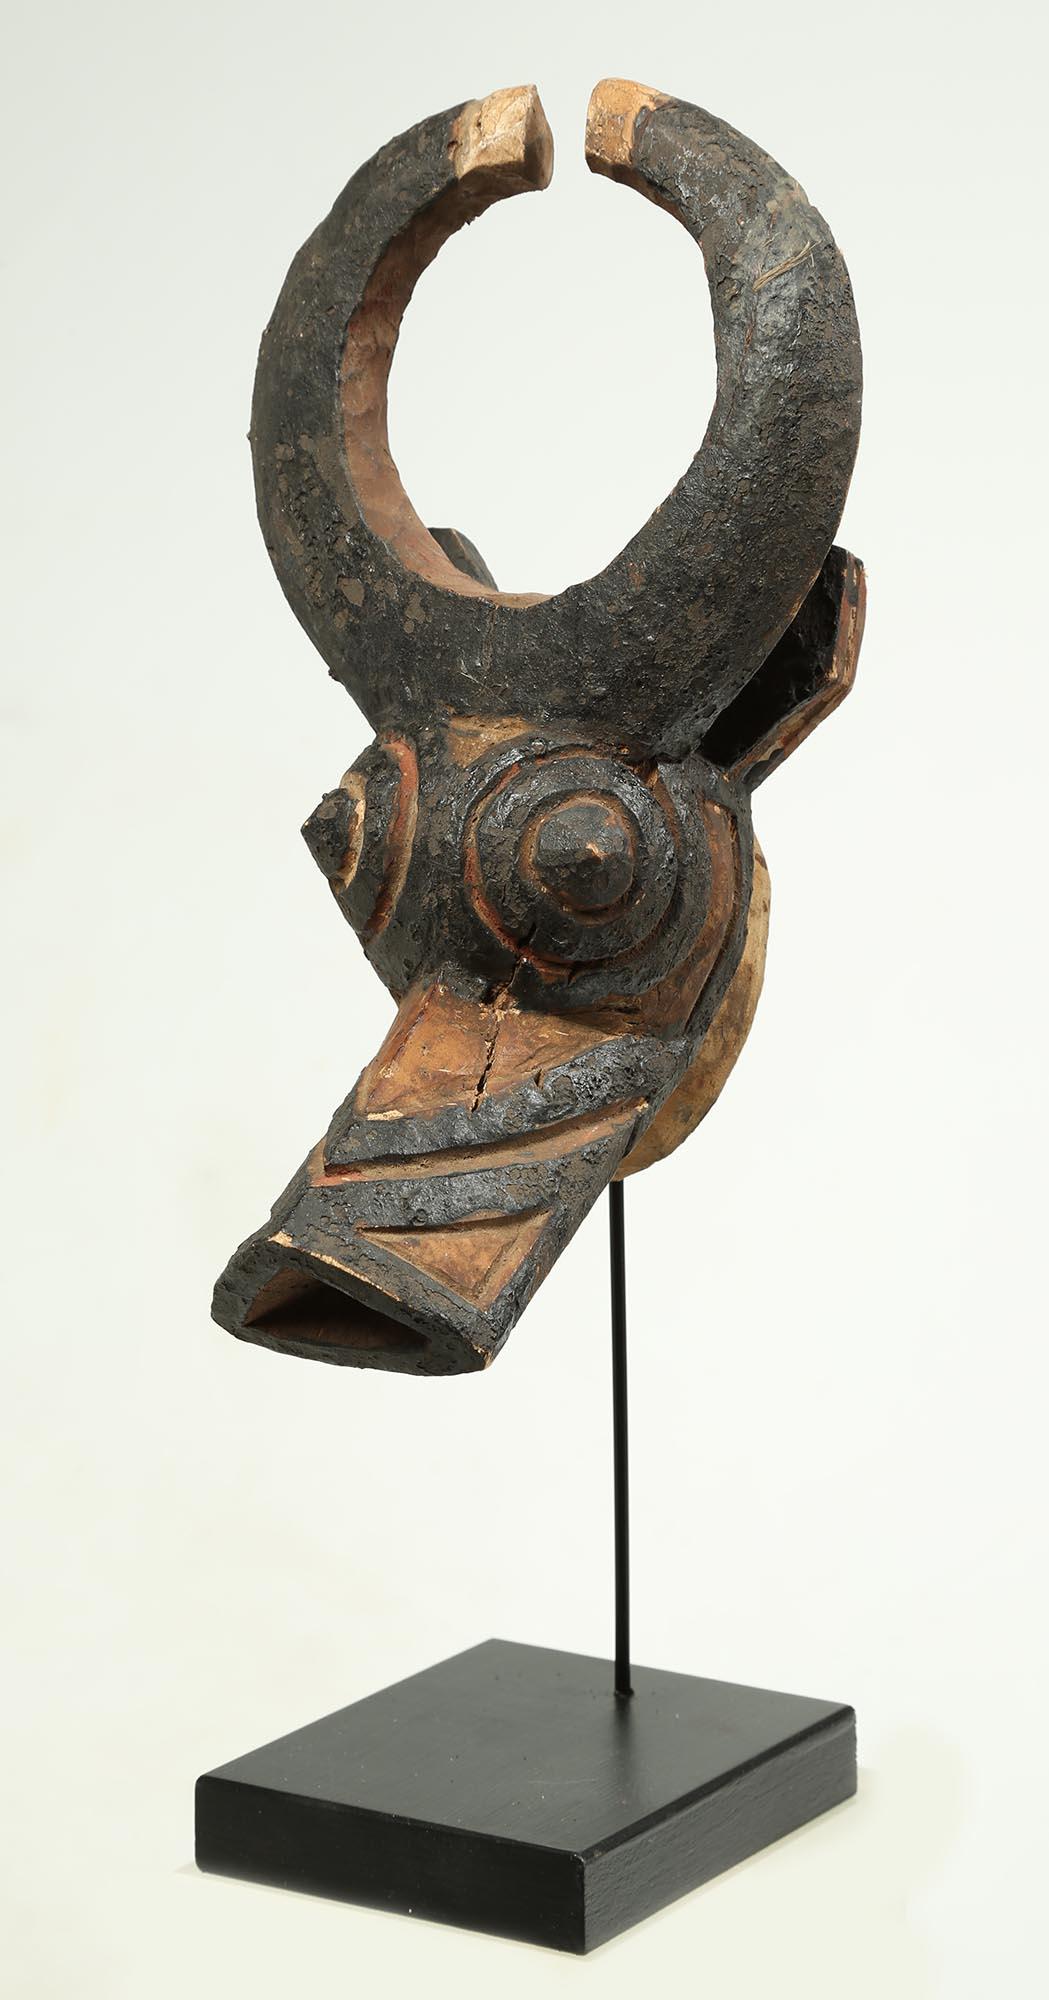 Tribal Contented Bush-Cow Mask, Burkina Faso, Early 20th Century Africa